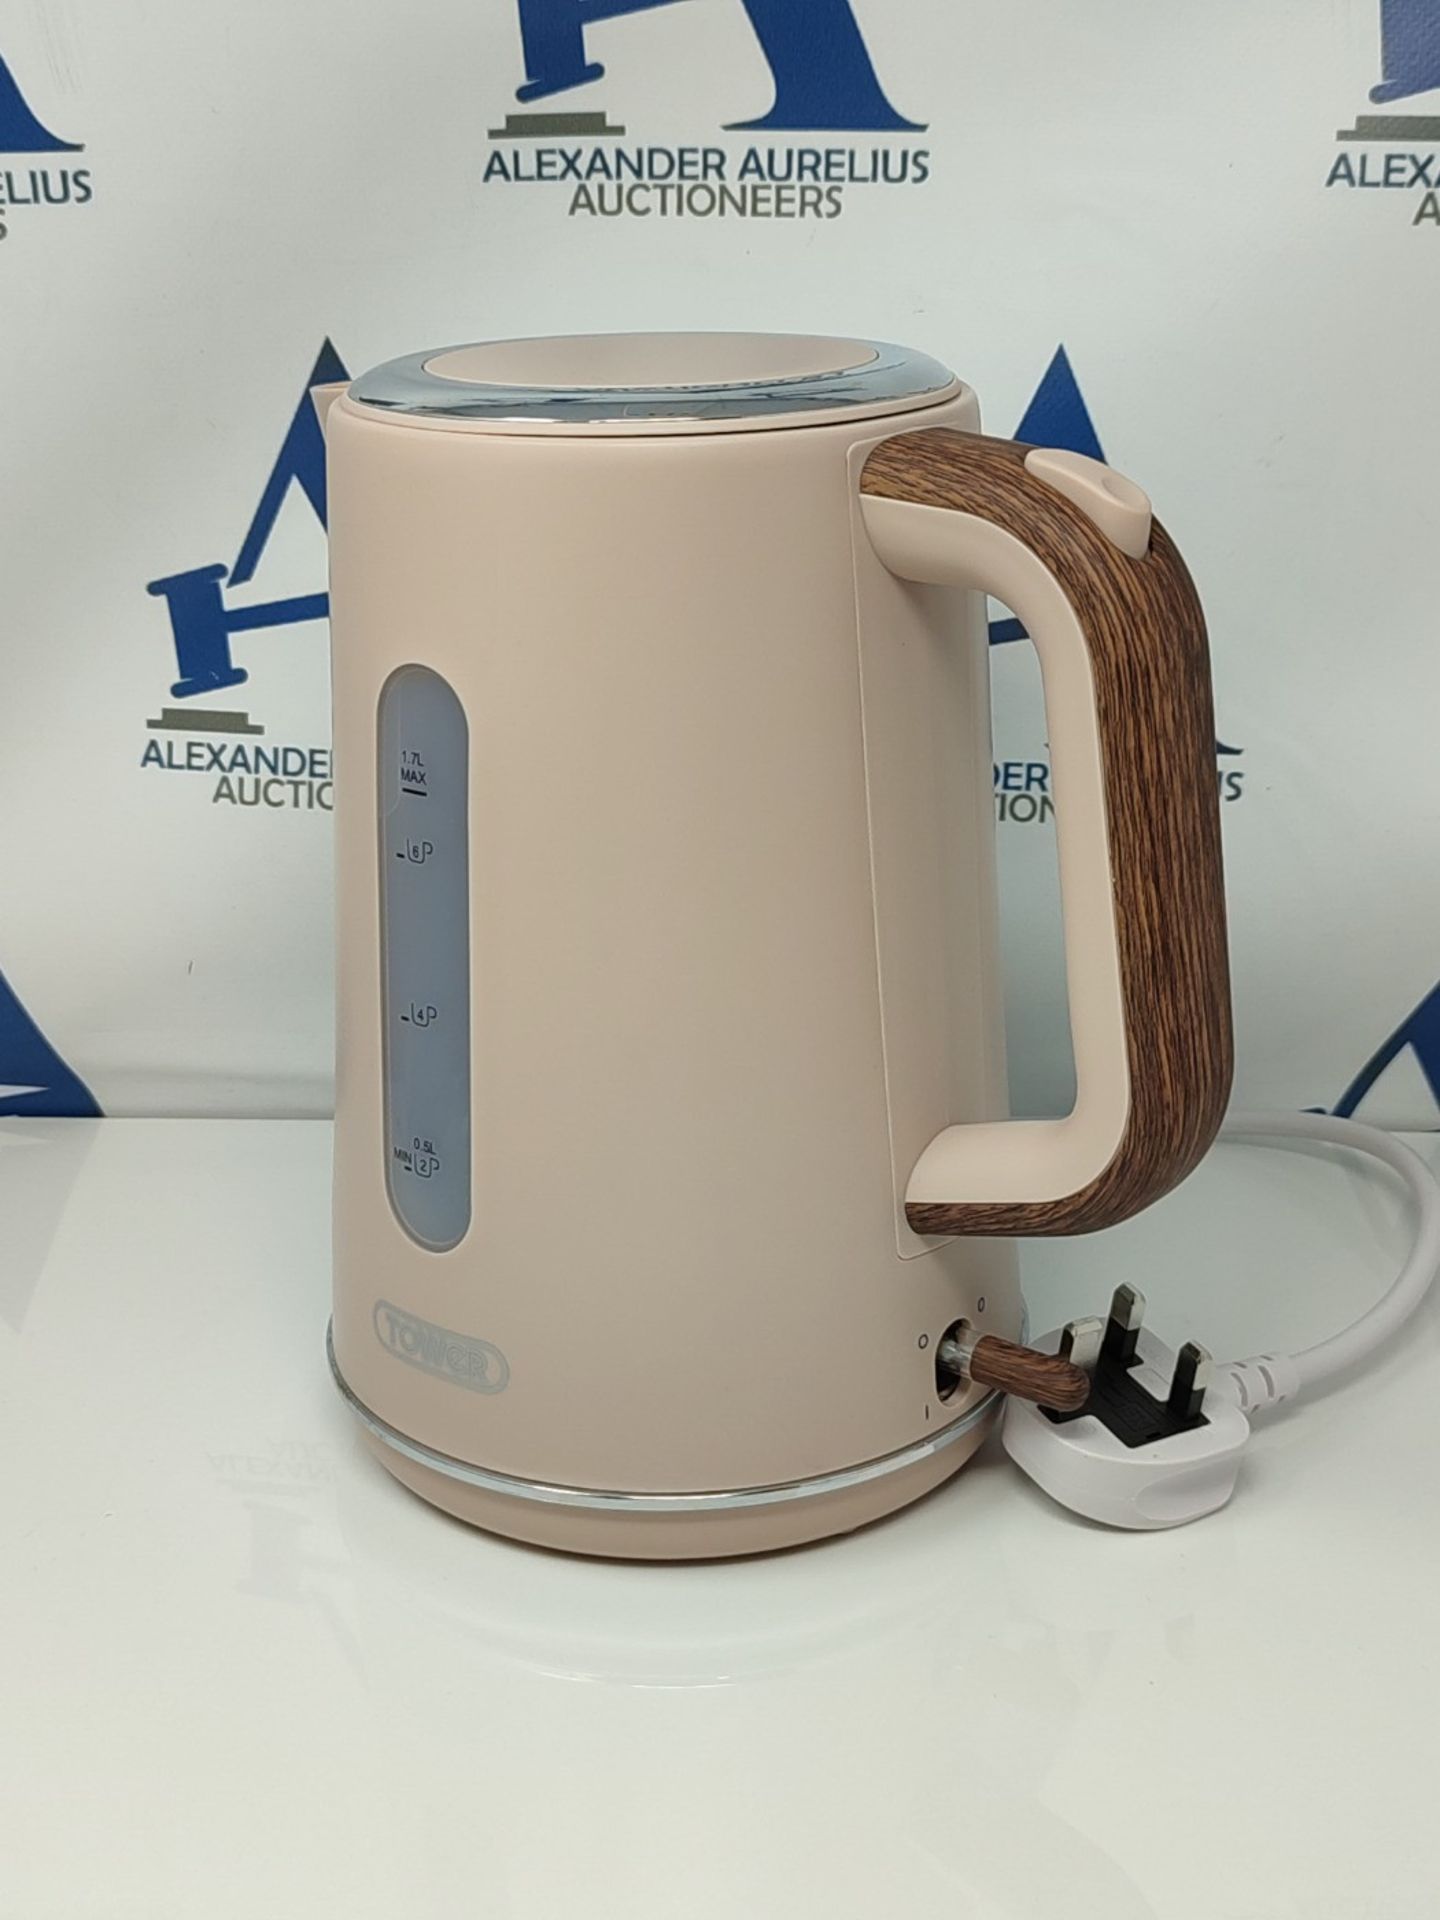 TOWER T10037PCLY Jug Kettle with Rapid Boil, 1.7 L, 3000W, Pink Clay - Image 3 of 3